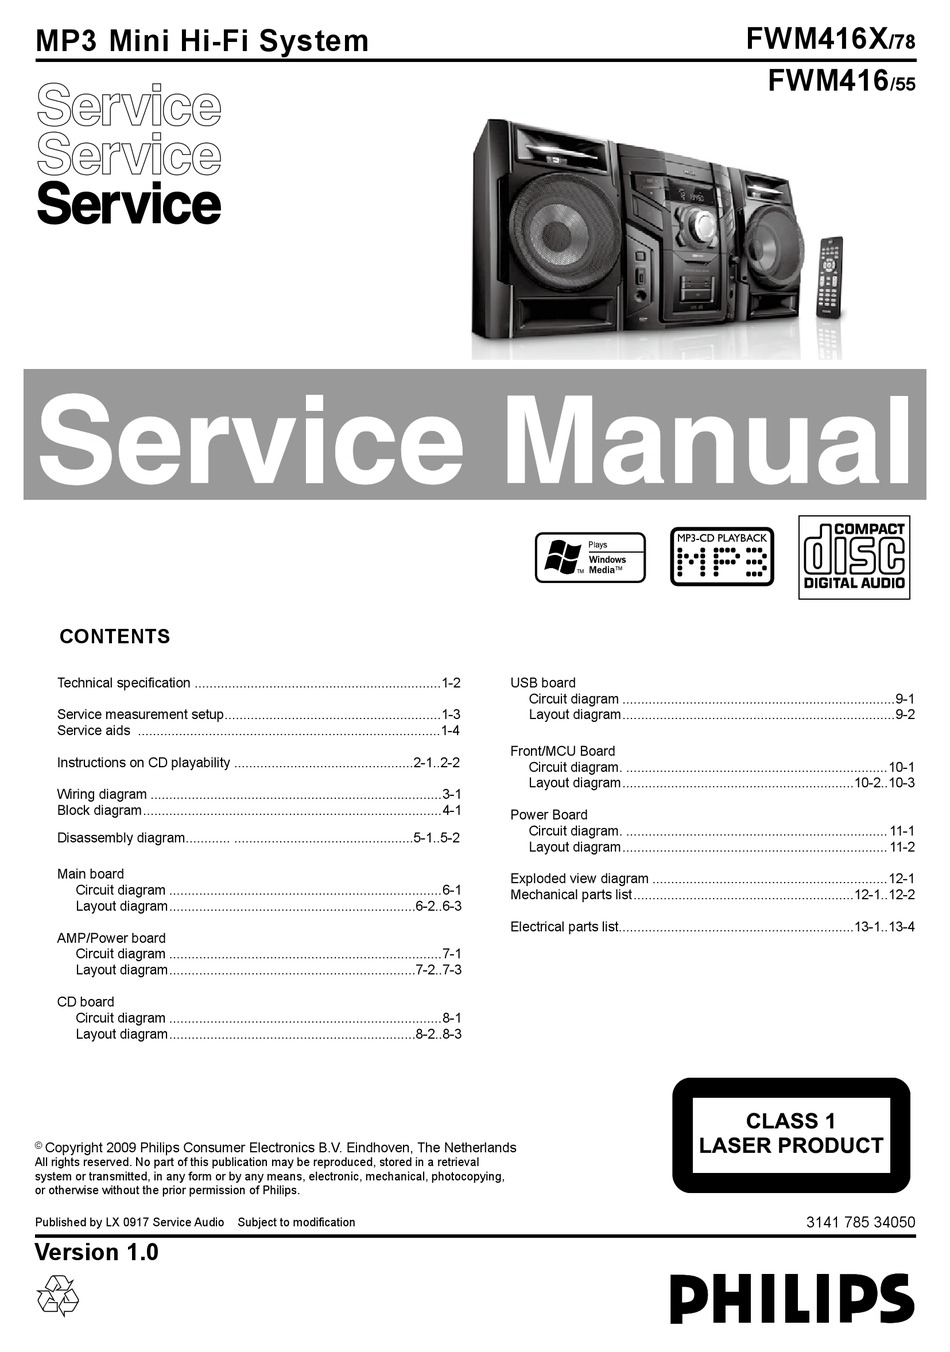 Service manual philips. Philips fw56 service manual. Philips cd303 service manual. Сервис мануал 78dsp. Сервис мануал Philips Bass.